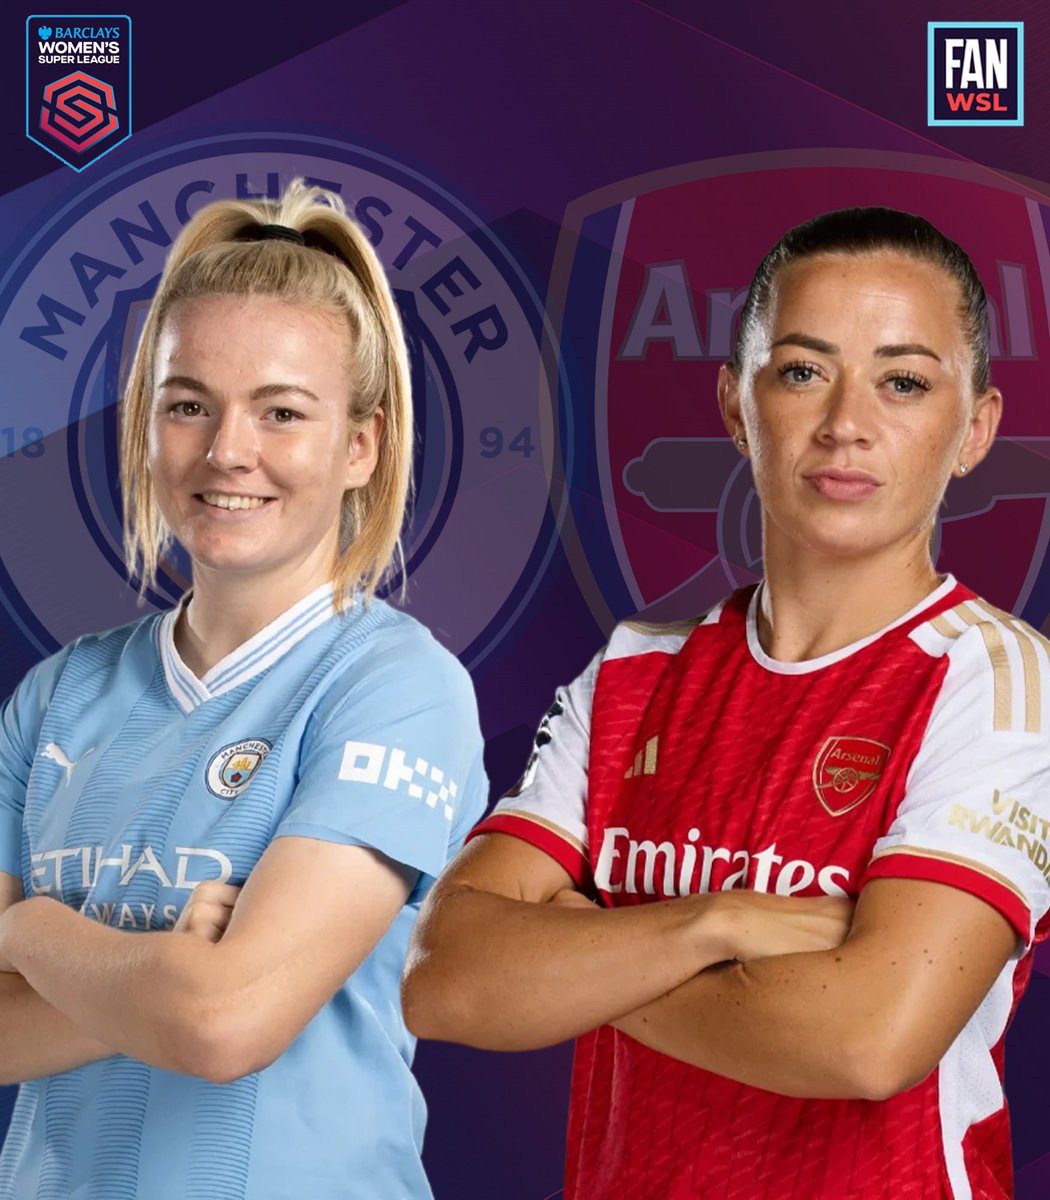 Huge game in the #BarclaysWSL today. Score predictions? 👇